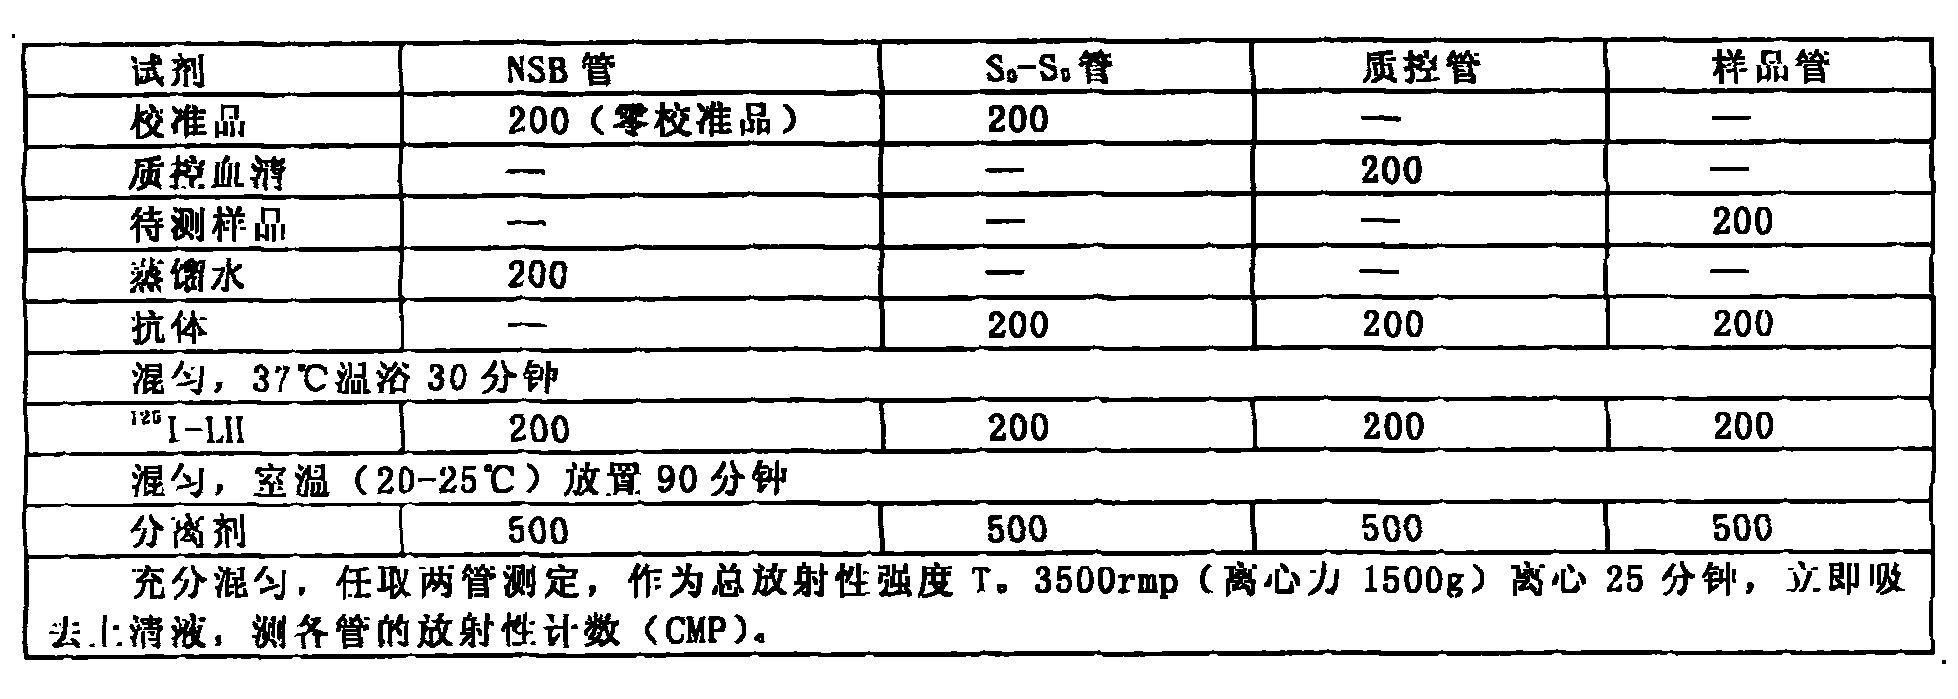 Epimedium extract for treating climacteric syndrome